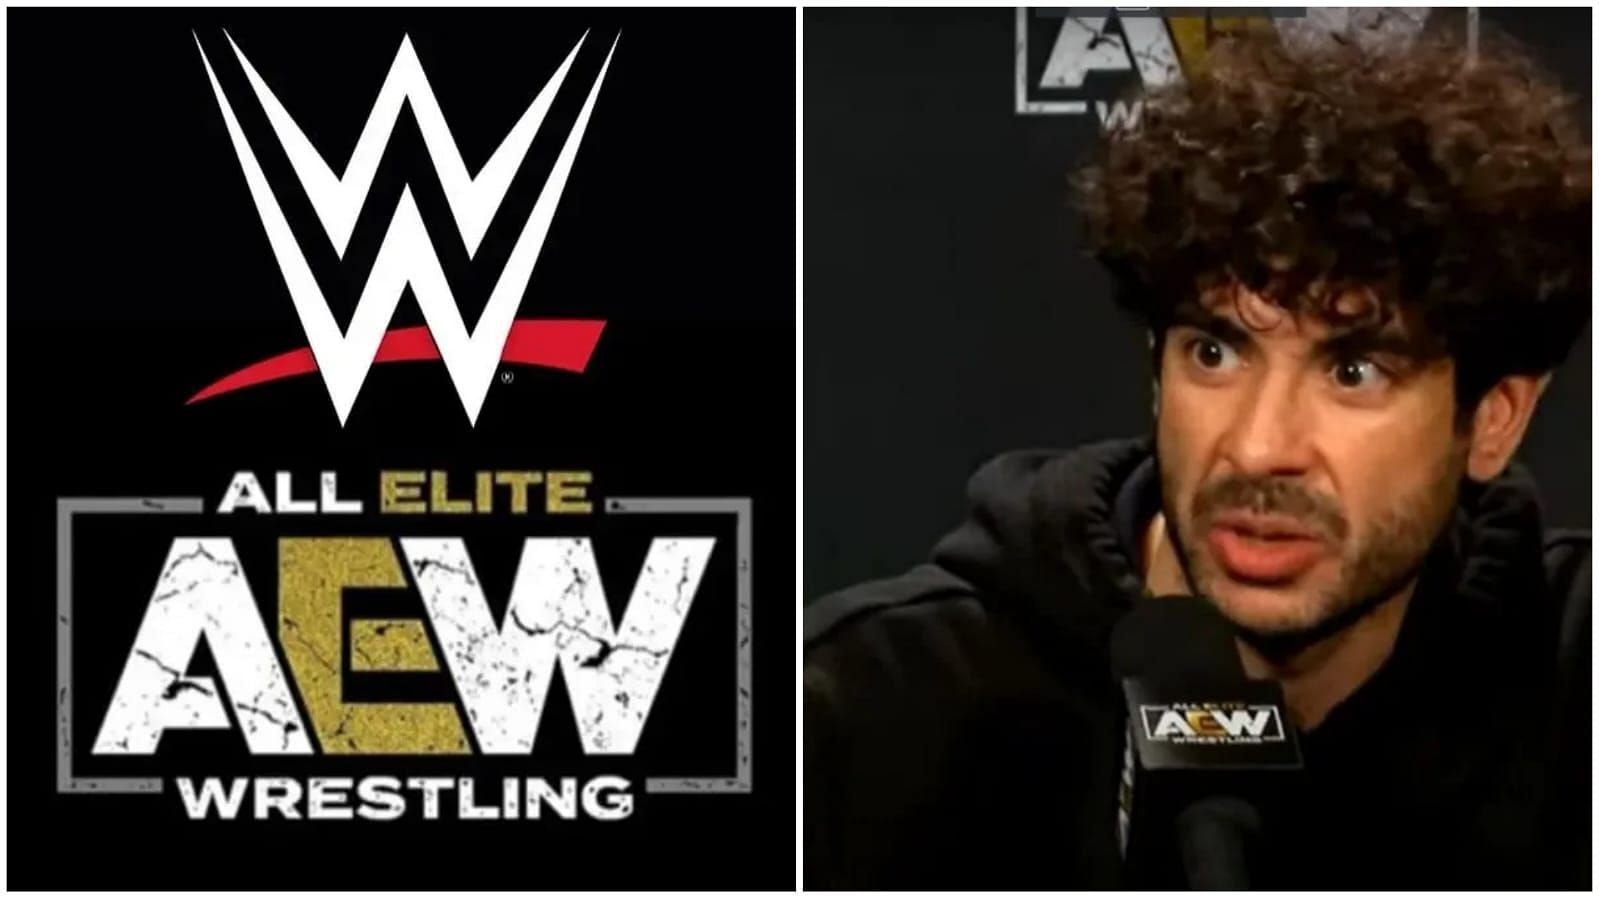 Tony Khan released a young star from All Elite Wrestling last week